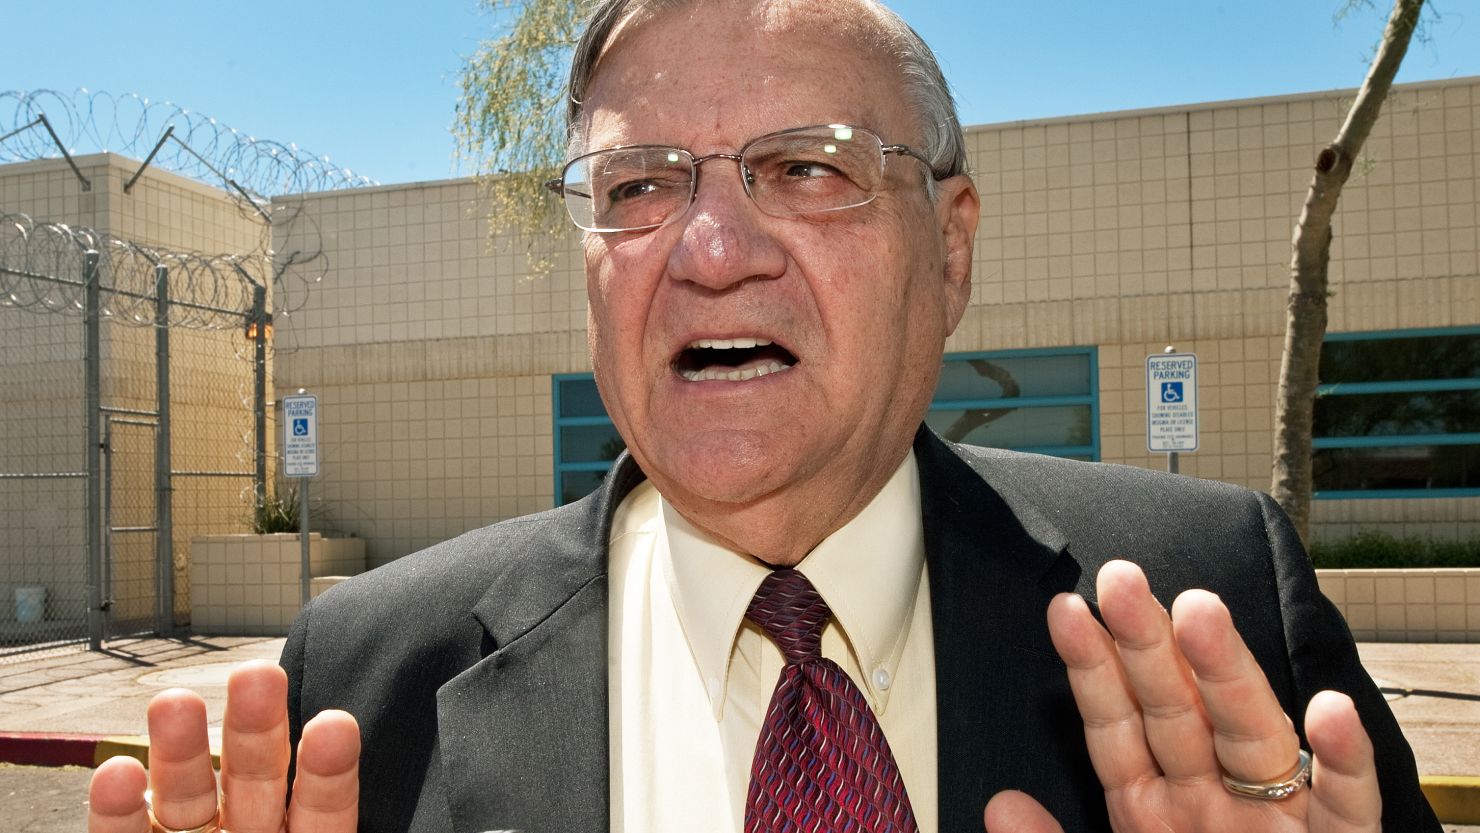 Maricopa County Sheriff Joe Arpaio speaks with a reporter in May 2010.